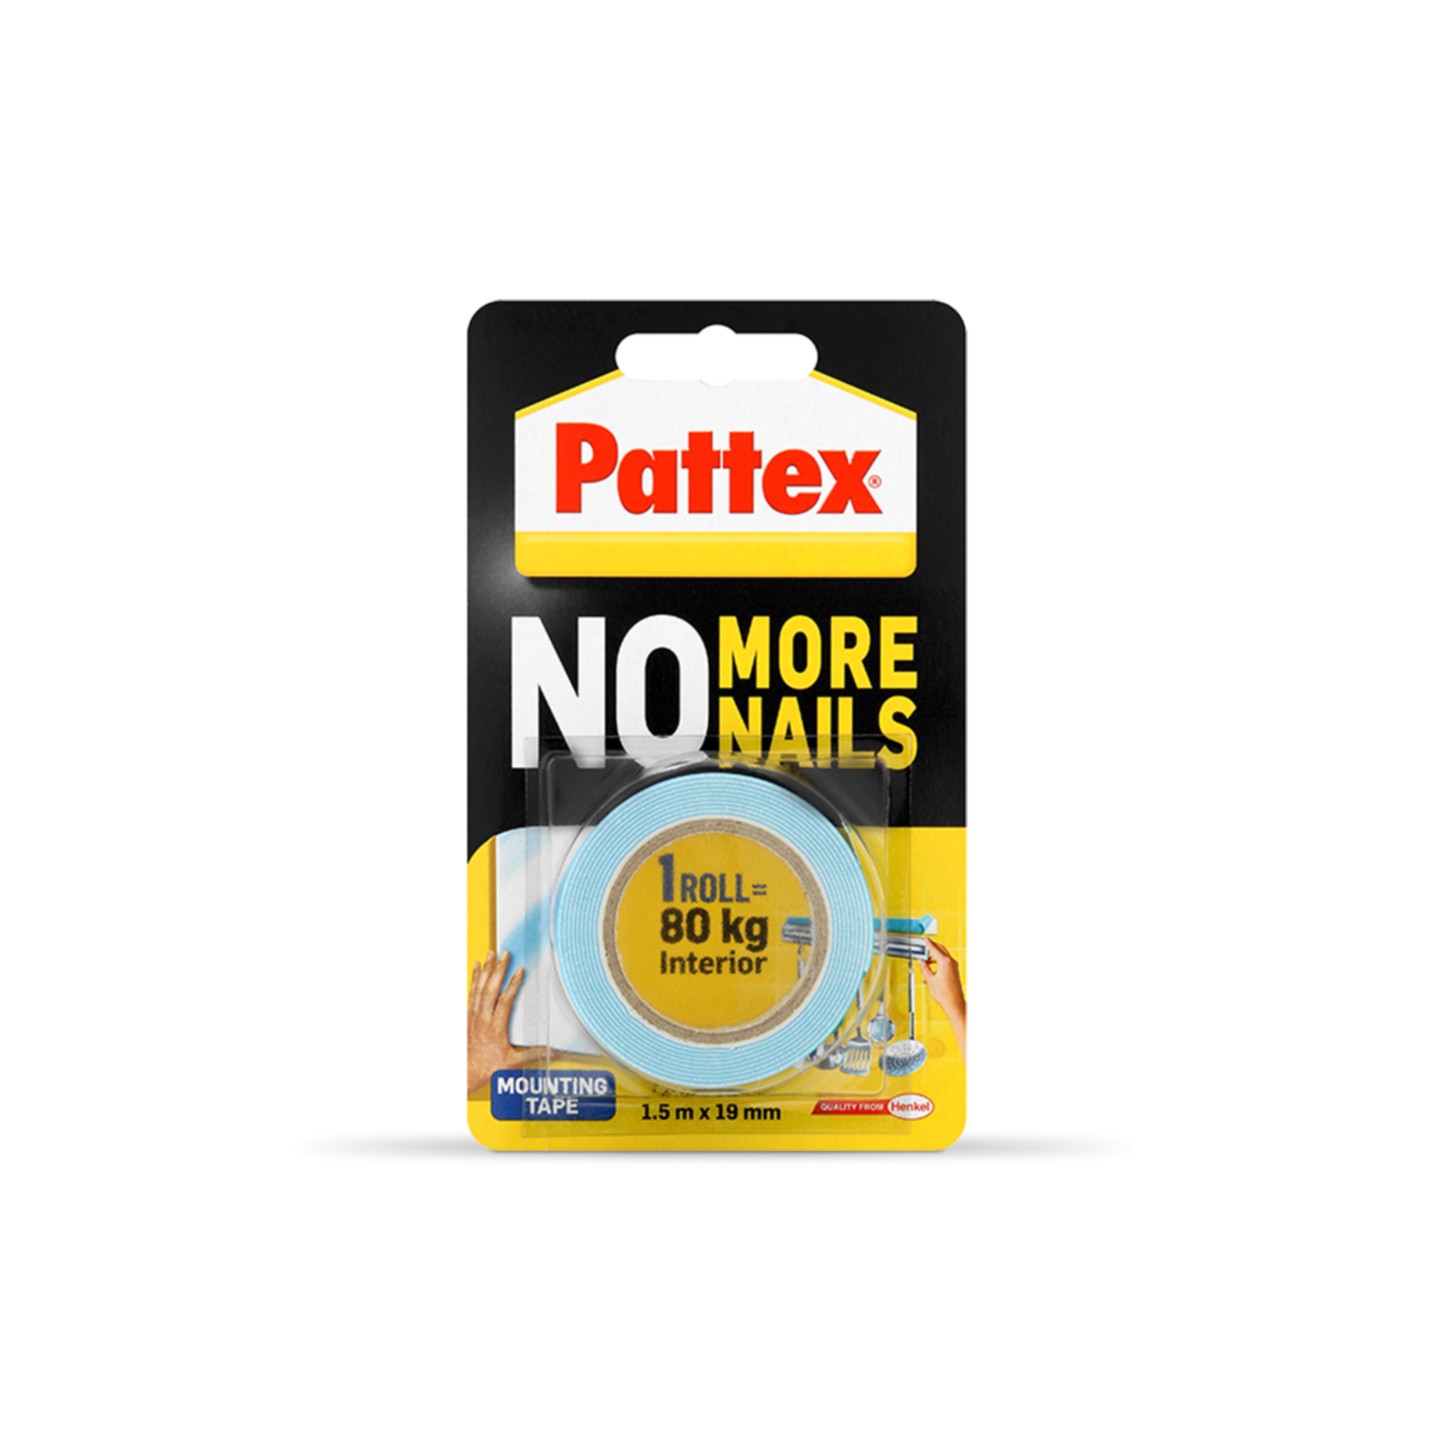 Pattex No More Nails Mounting Tape